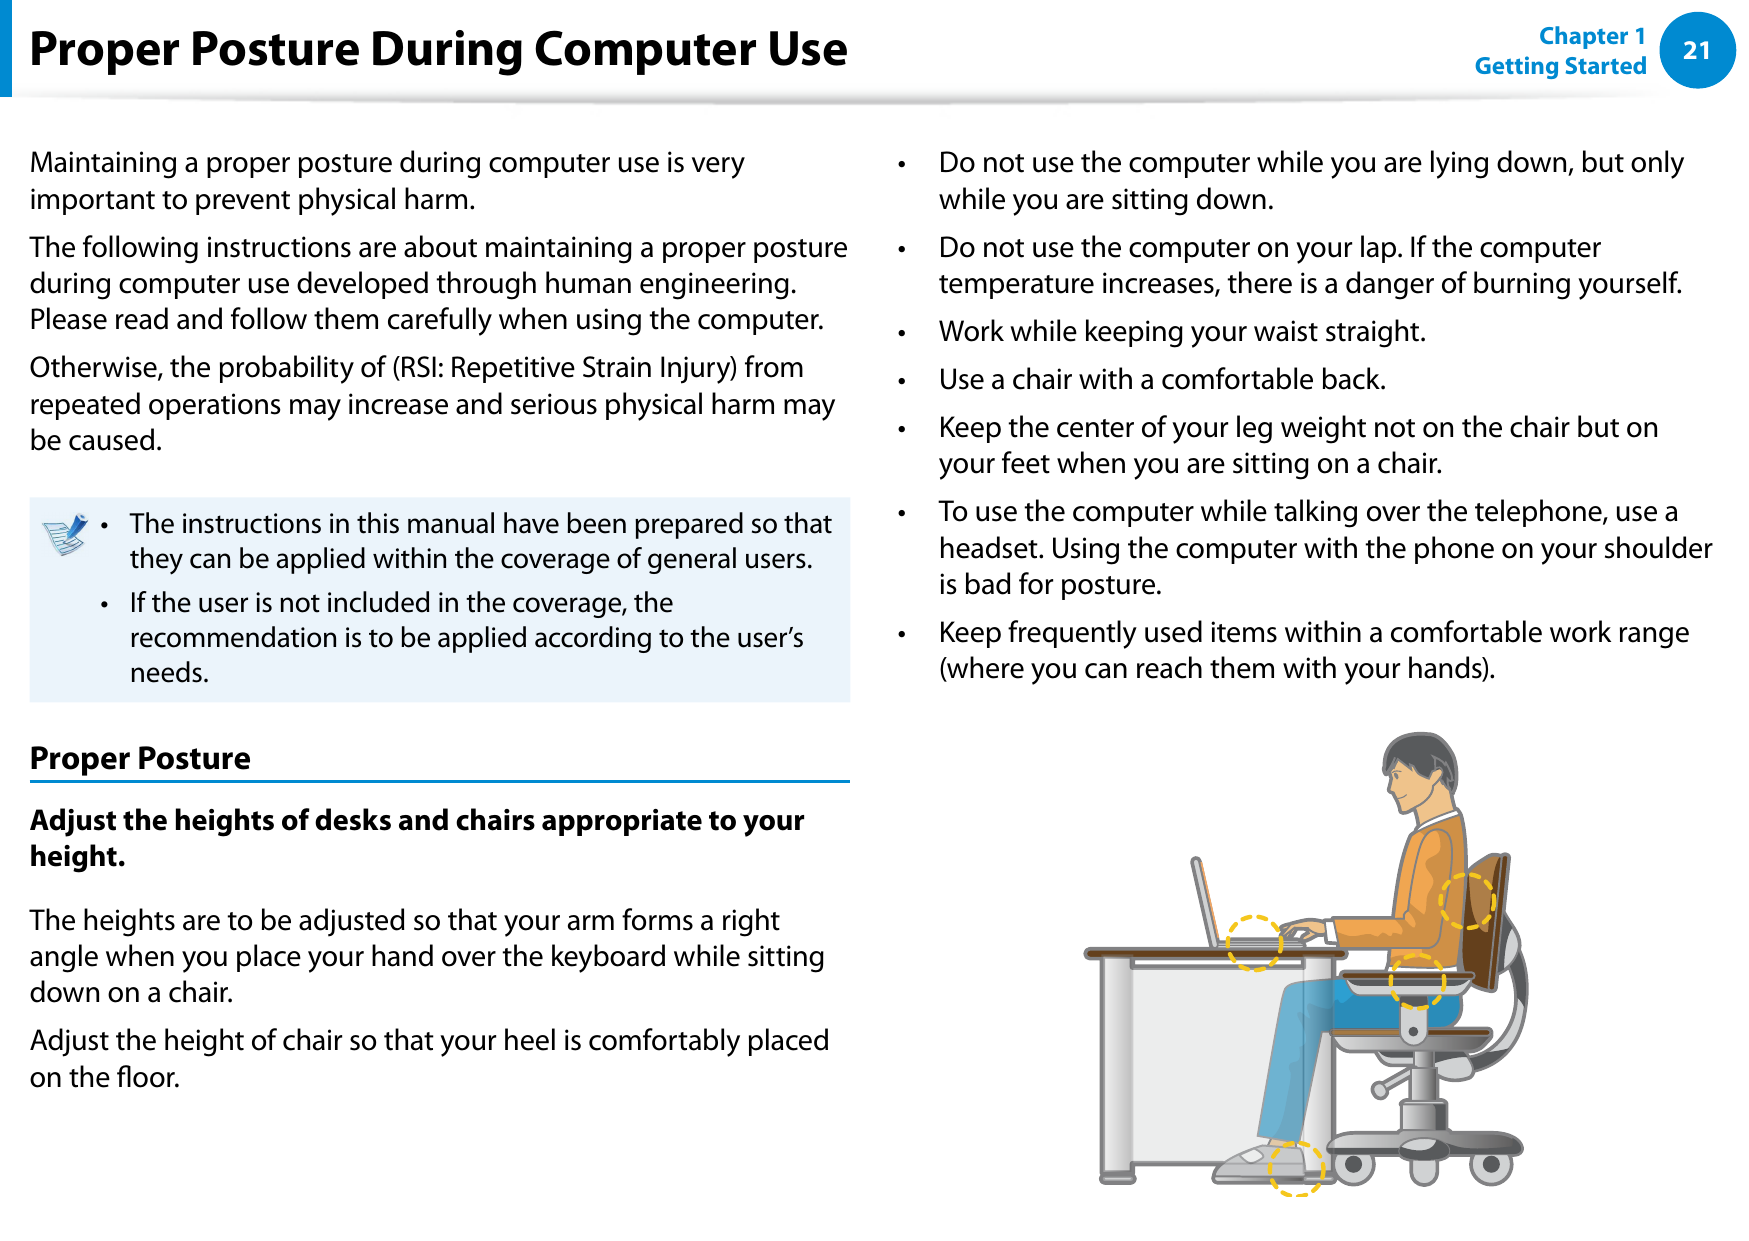 2021Chapter 1 Getting StartedProper Posture During Computer UseMaintaining a proper posture during computer use is very important to prevent physical harm.The following instructions are about maintaining a proper posture during computer use developed through human engineering. Please read and follow them carefully when using the computer.Otherwise, the probability of (RSI: Repetitive Strain Injury) from repeated operations may increase and serious physical harm may be caused.The instructions in this manual have been prepared so that • they can be applied within the coverage of general users. If the user is not included in the coverage, the • recommendation is to be applied according to the user’s needs.Proper PostureAdjust the heights of desks and chairs appropriate to your height.The heights are to be adjusted so that your arm forms a right angle when you place your hand over the keyboard while sitting down on a chair.Adjust the height of chair so that your heel is comfortably placed on the oor.Do not use the computer while you are lying down, but only • while you are sitting down.Do not use the computer on your lap. If the computer • temperature increases, there is a danger of burning yourself.Work while keeping your waist straight.• Use a chair with a comfortable back.• Keep the center of your leg weight not on the chair but on • your feet when you are sitting on a chair.To use the computer while talking over the telephone, use a • headset. Using the computer with the phone on your shoulder is bad for posture.Keep frequently used items within a comfortable work range • (where you can reach them with your hands).